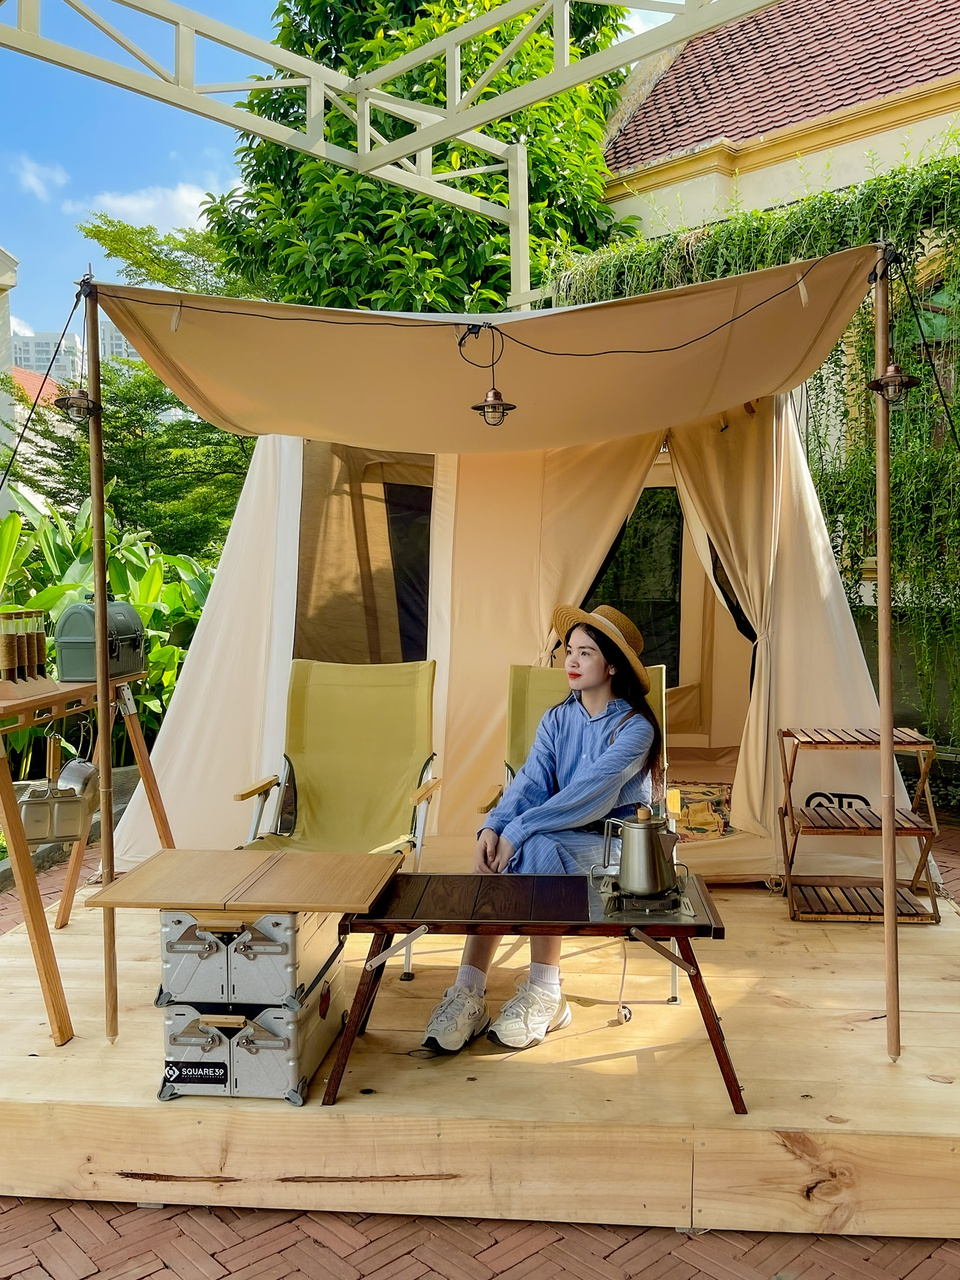 Khuong Duy, the founder of Square 39, shared with Zing: “The café follows the high-camping model. It has tents, beds, air conditioners, bathrooms, electric water heaters, tables and desks, and even kitchens”. This architecture has been famous in many countries in Asia such as Japan, Korea and Thailand.  Photo: Anh Nguyet